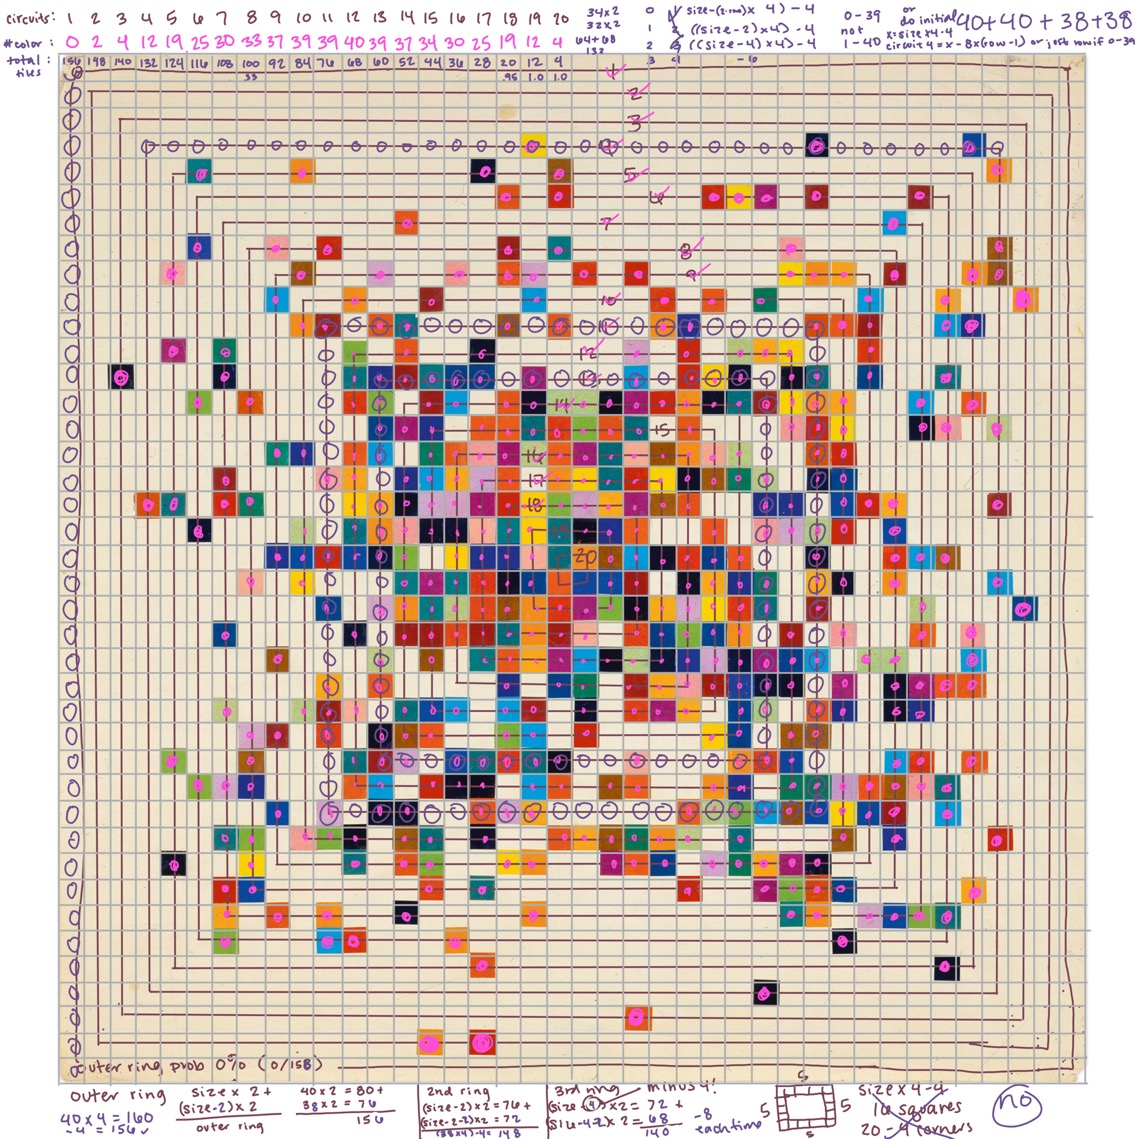 Ellsworth Kelly&#039;s artwork with writing on it to count things. The art is a grid of white paper with bright colors randomly filling some squares on the grid. There are more color-filled squares in the center than the edges.